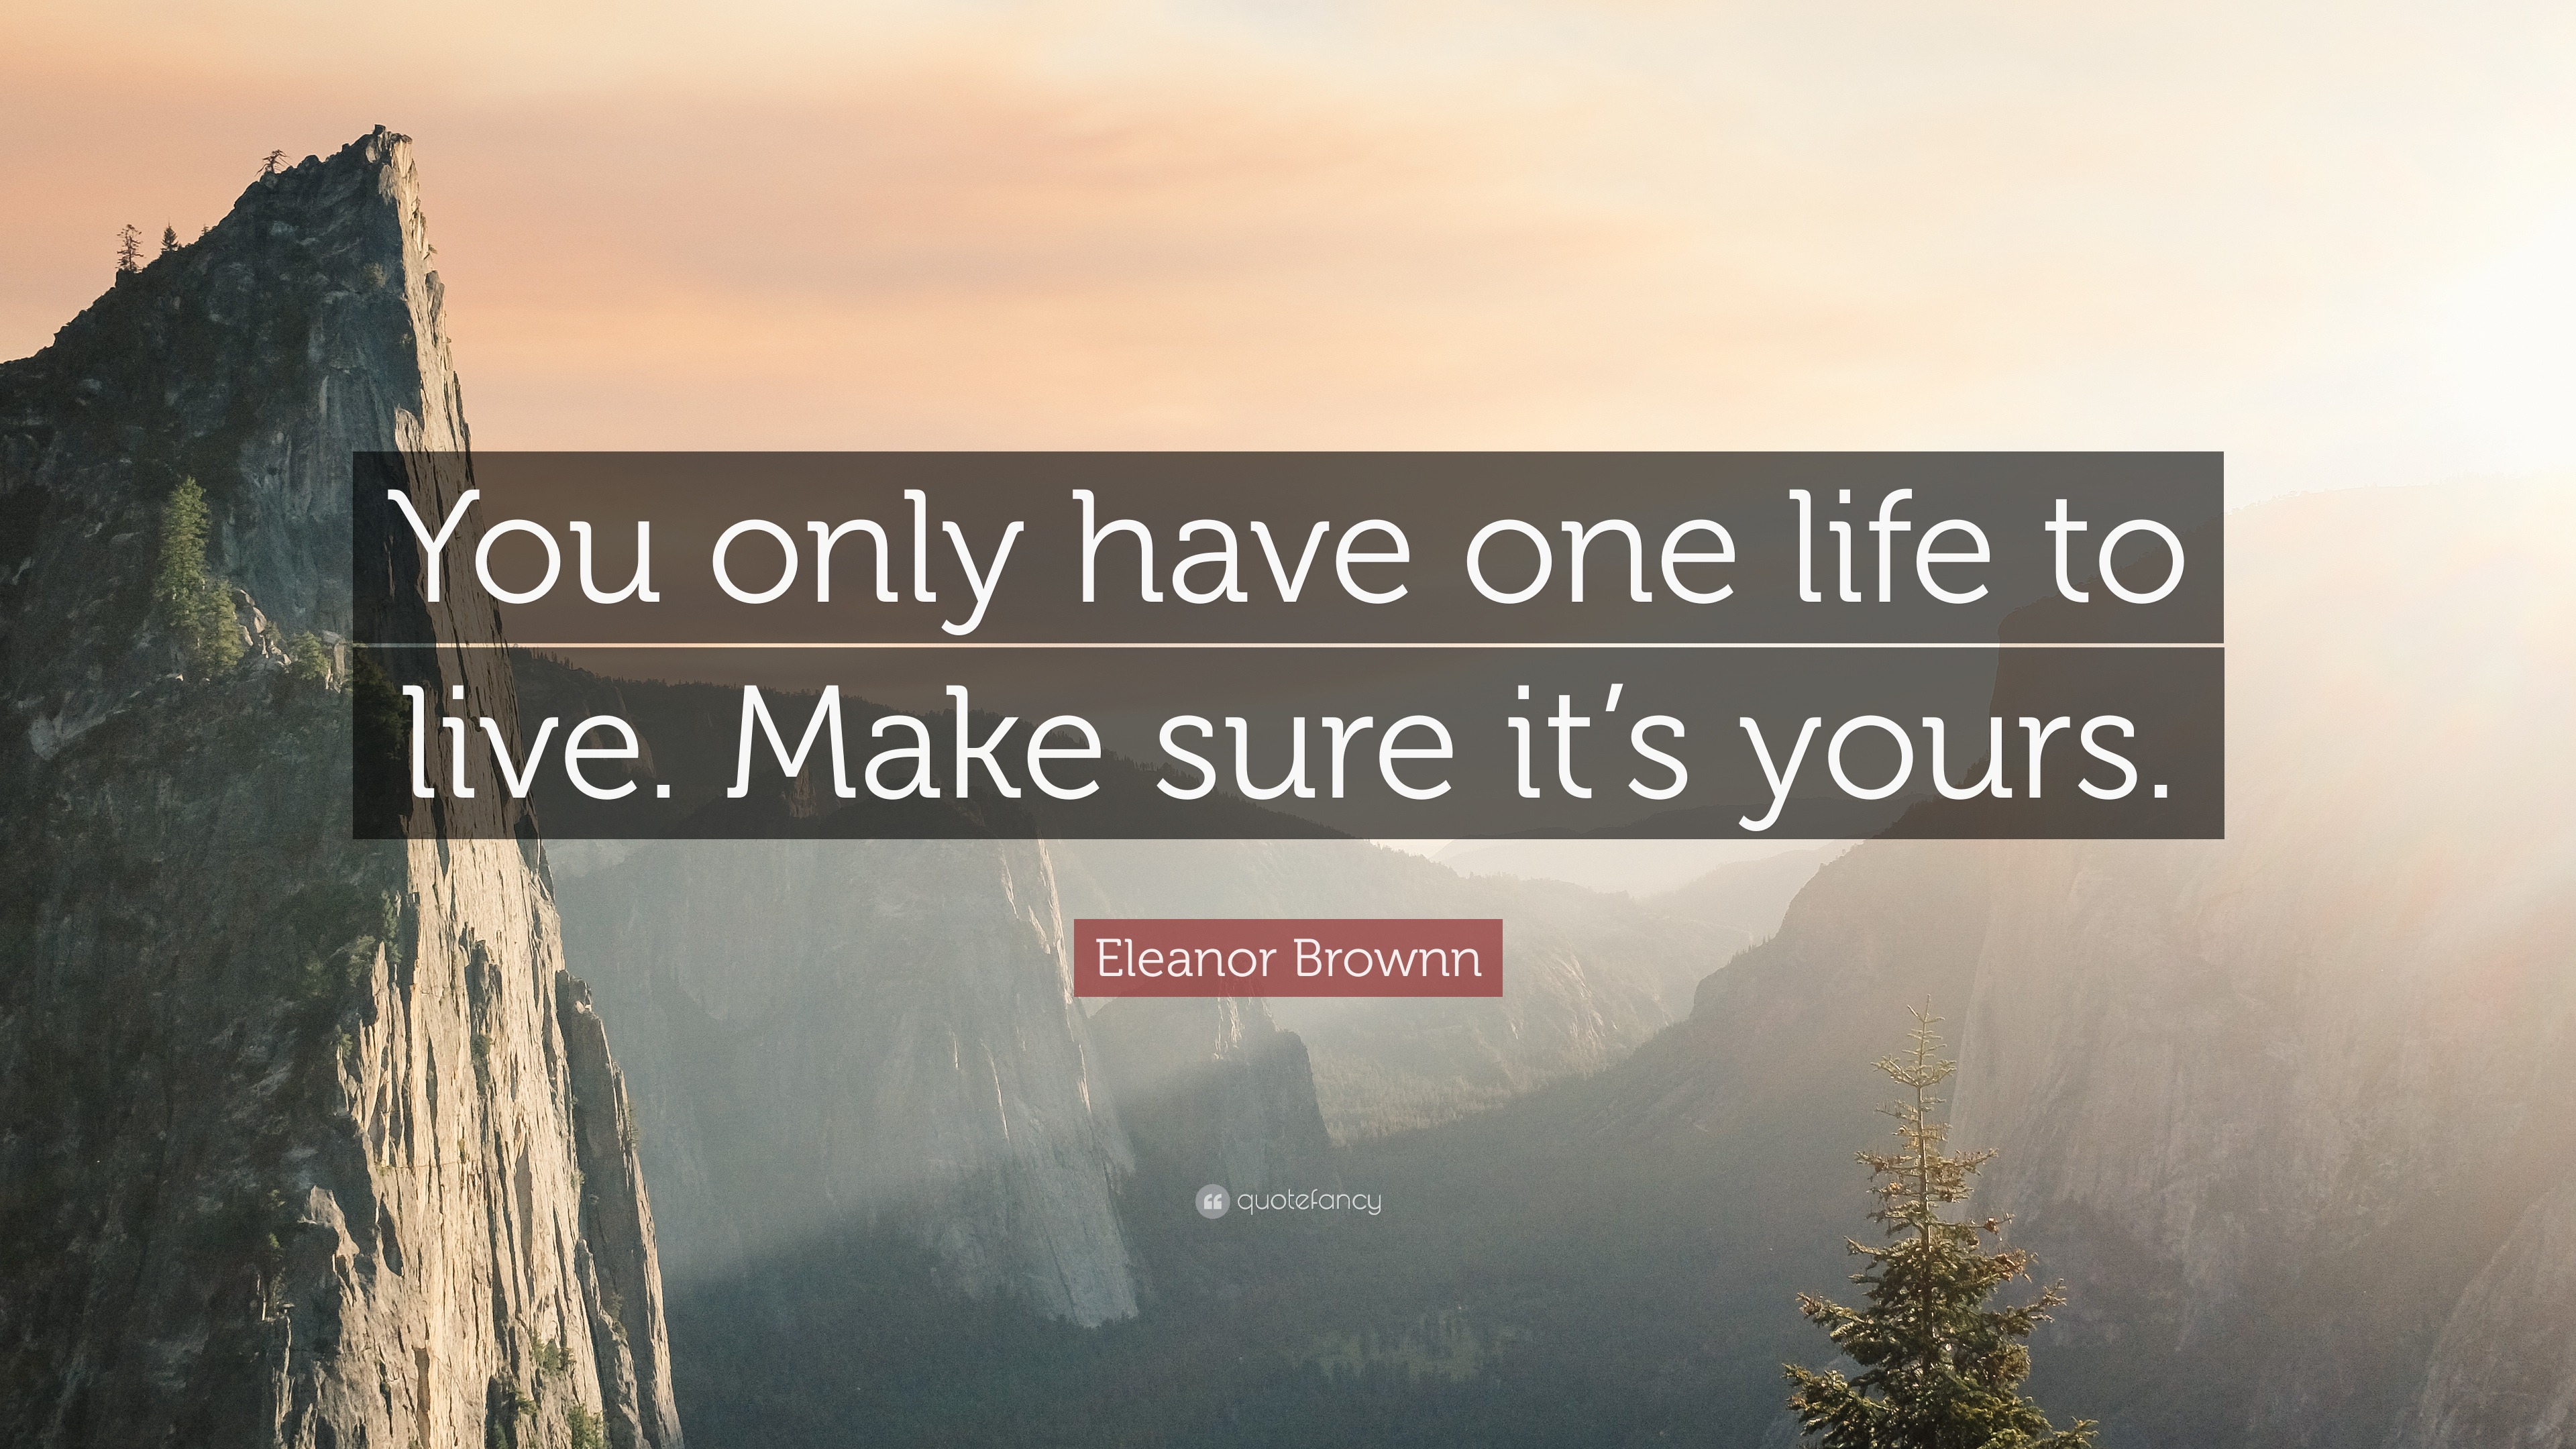 Eleanor Brownn Quote: “You only have one life to live. Make sure it’s ...